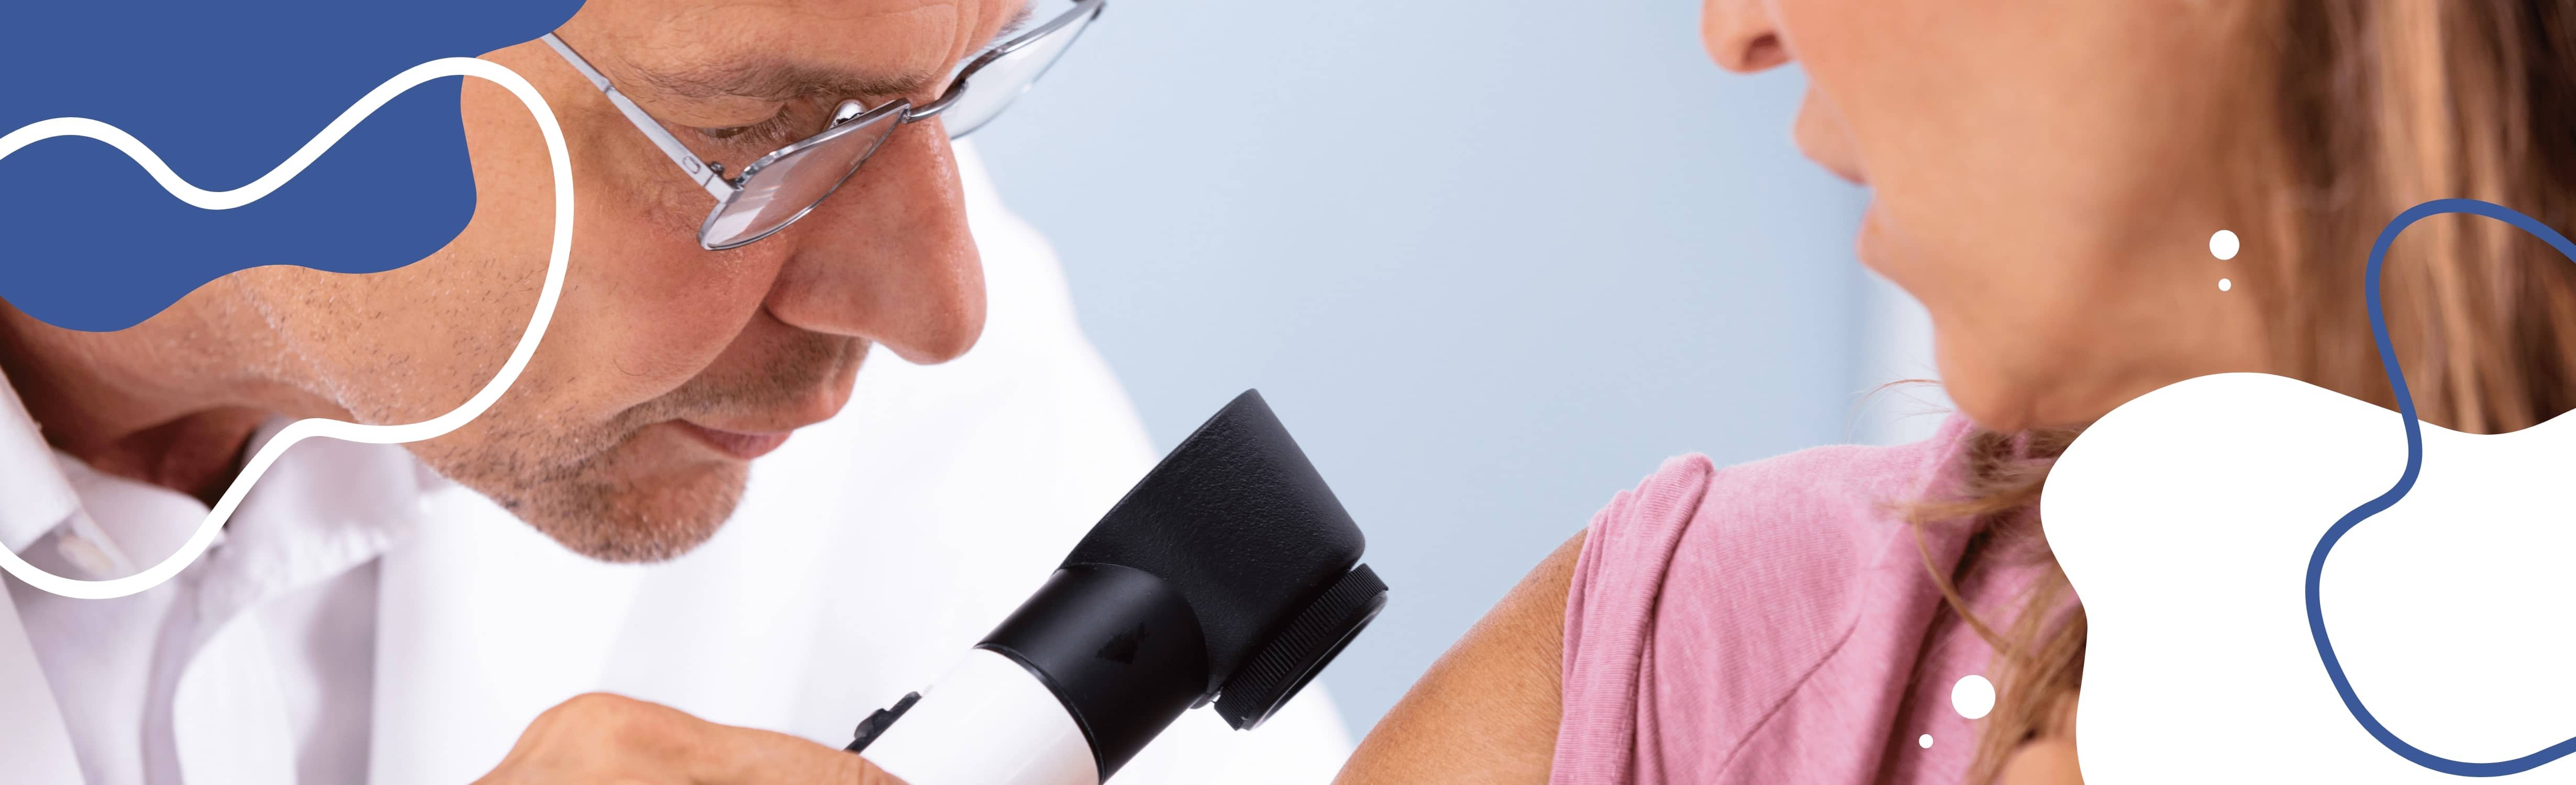 Melanoma diagnosis by a doctor